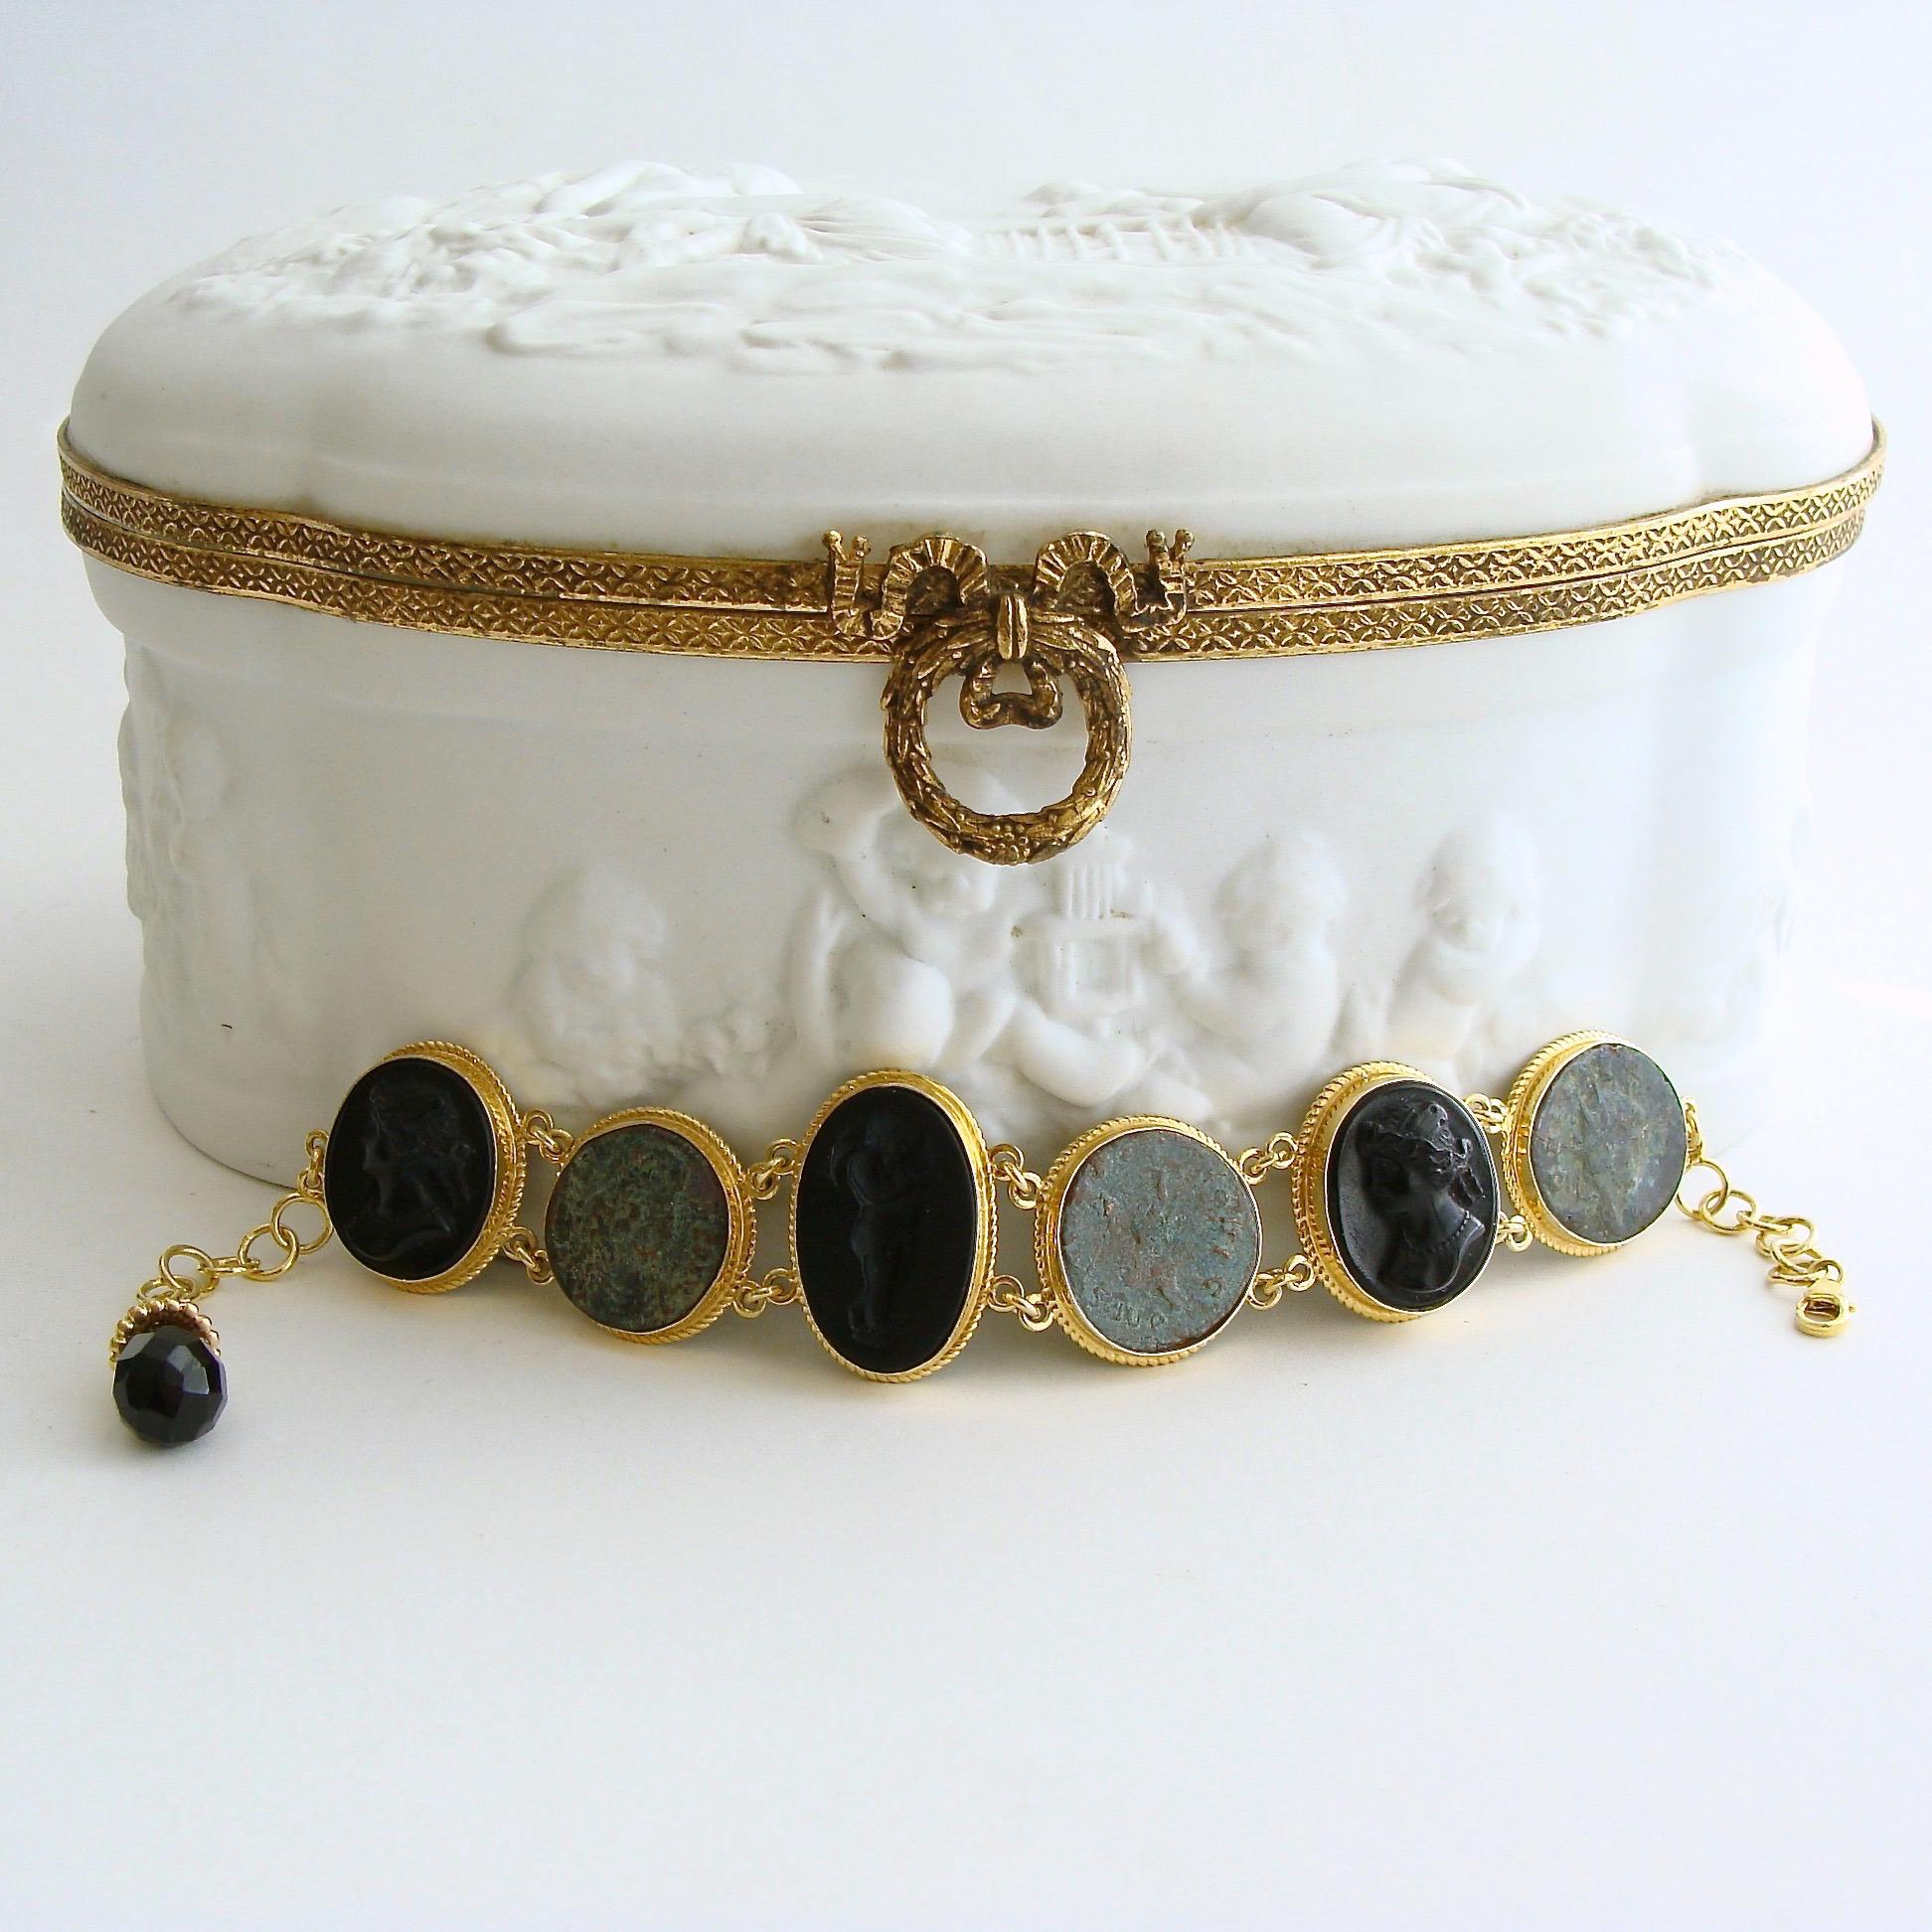 Distinctive black Venetian glass cameos/intaglios alternate with graphite gray ancient Roman coins to create this classic bracelet.  Each of the intaglios and coins sits in bezeled mountings accented with a twisted border made of gold vermeil.  The